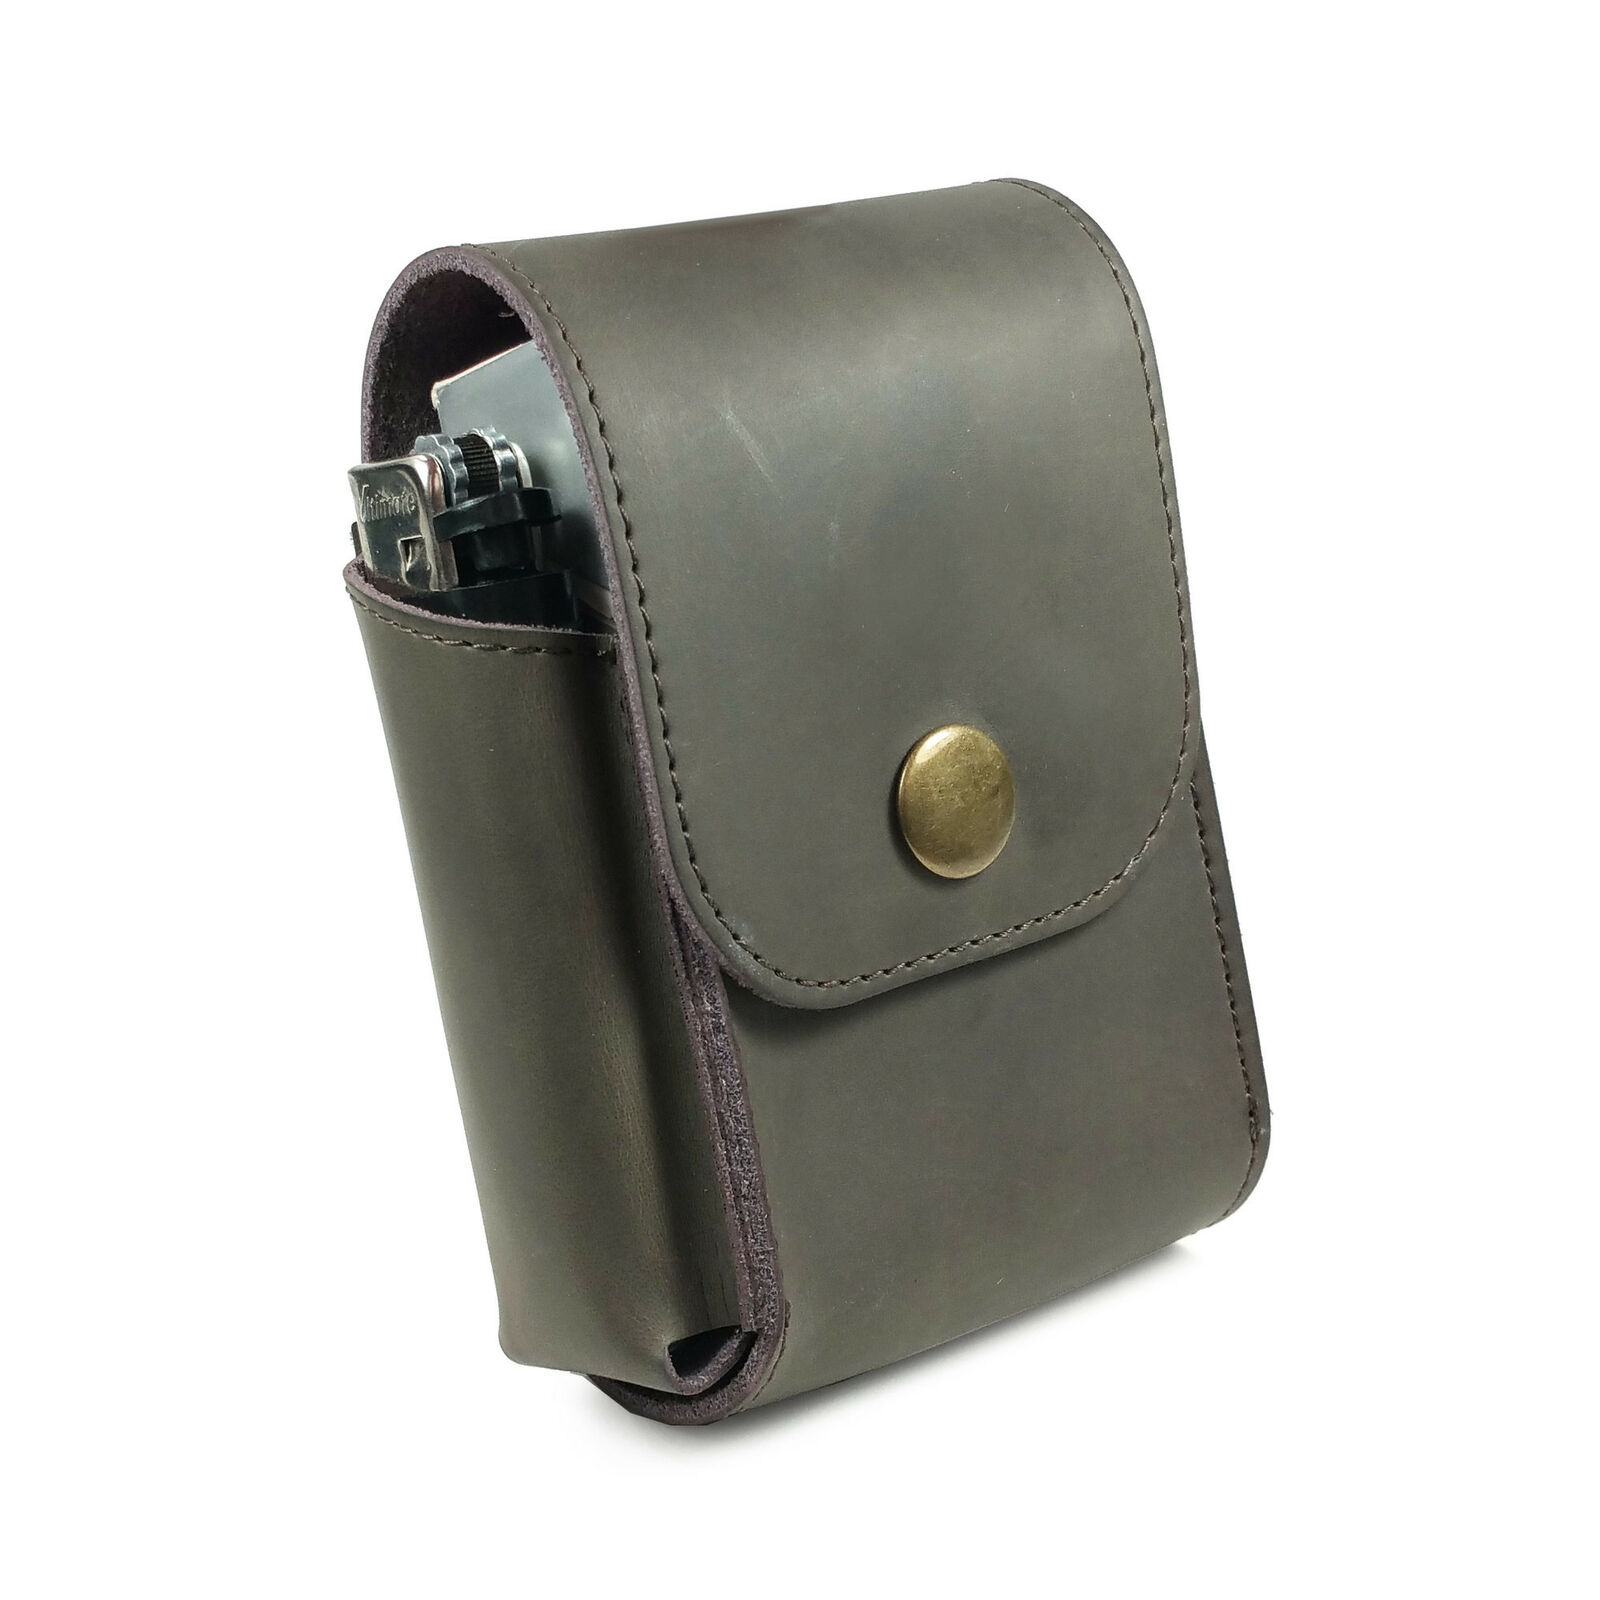 TUFF LUV Genuine Leather Cigarette / Tobacco Case with a Belt Loop -Mocca Brown